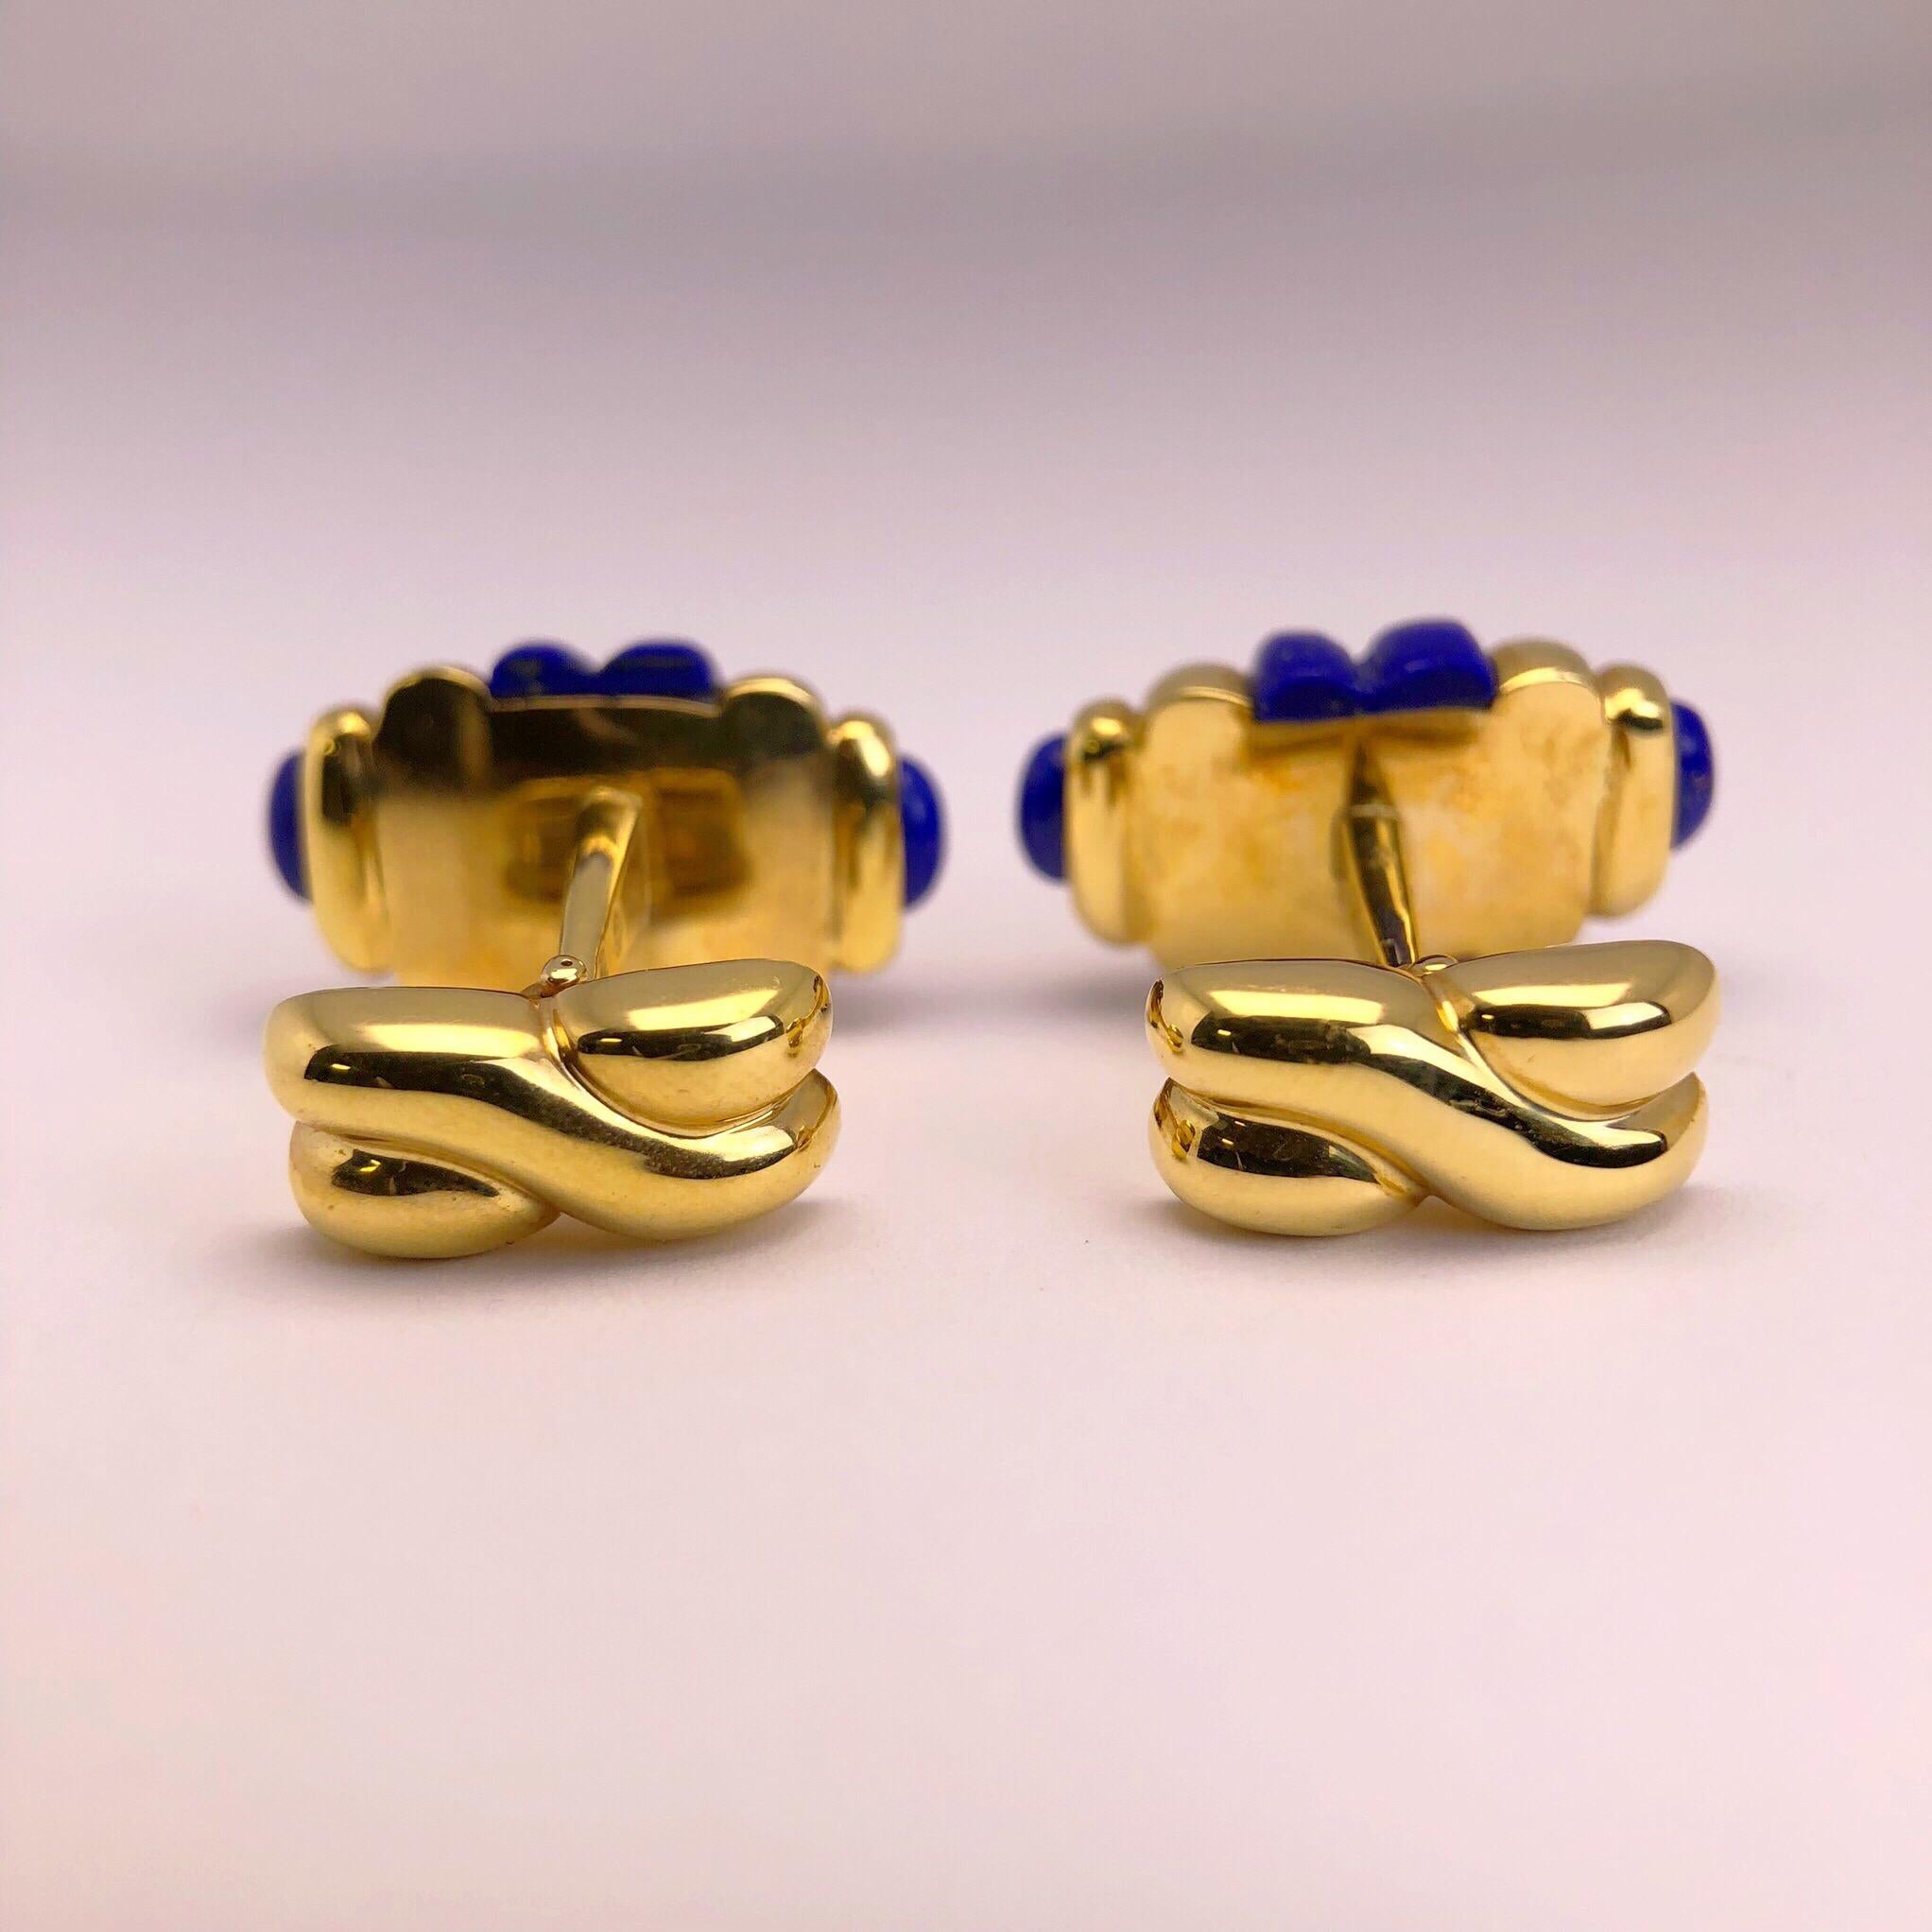 Created by George Gero, renowned worldwide for luxurious men's cuff-links, comes this classic  barrel shaped pair  which are set in 18 karat yellow gold  that alternates with carved Lapis Lazuli.  
Collapsible backs are finished with a criss cross